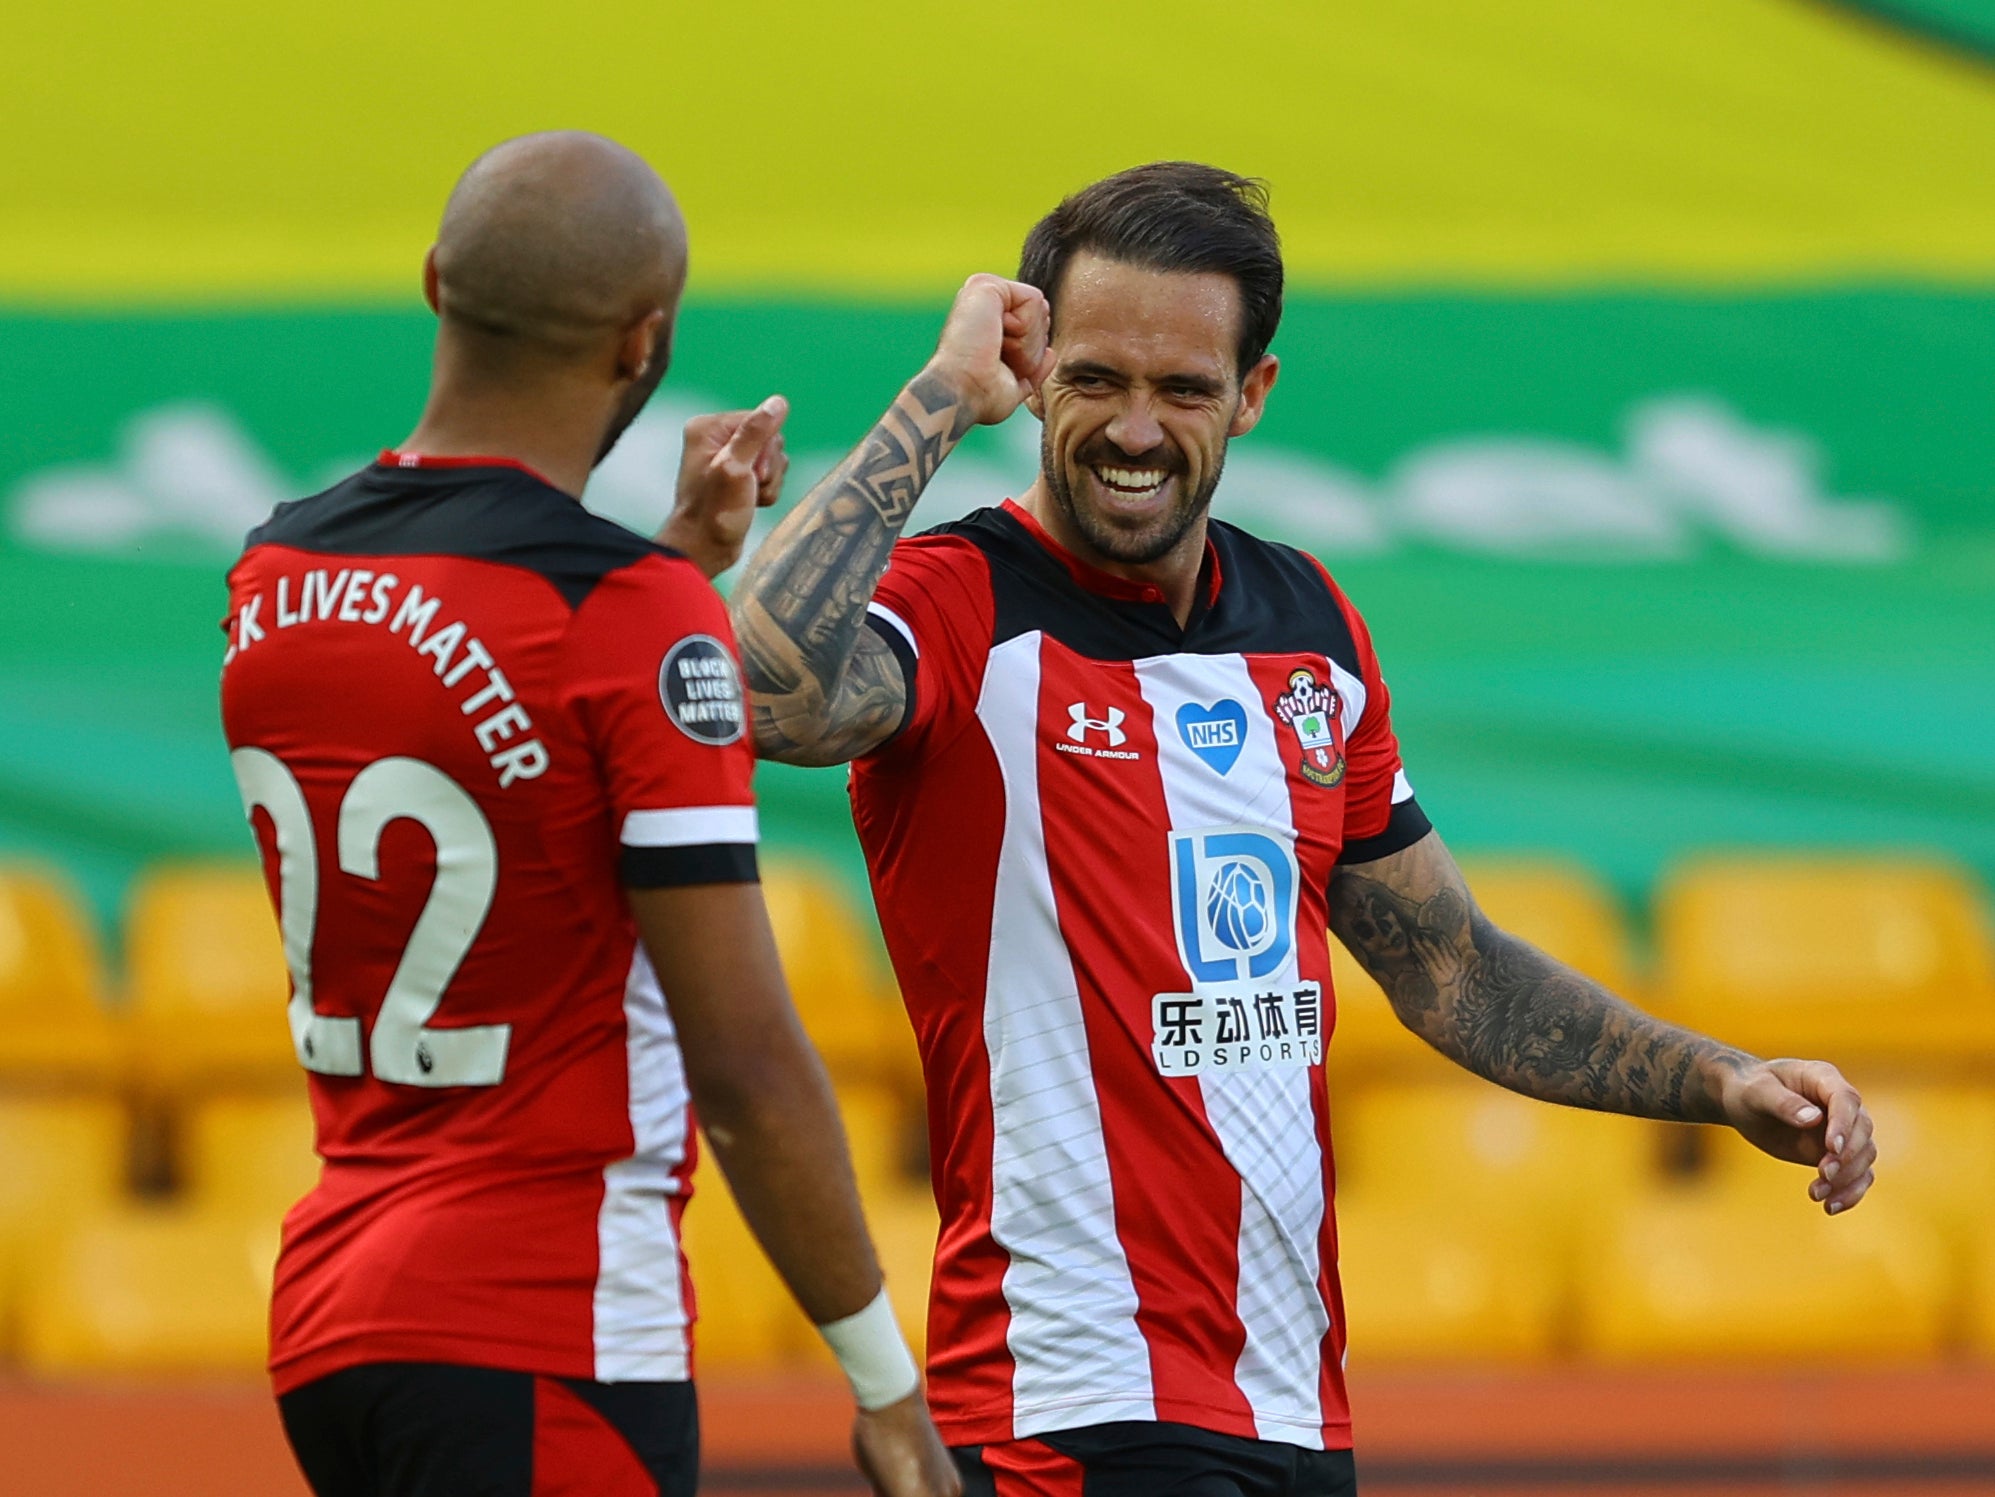 Norwich vs Southampton result: Danny Ings strikes as Saints outclass struggling Canaries